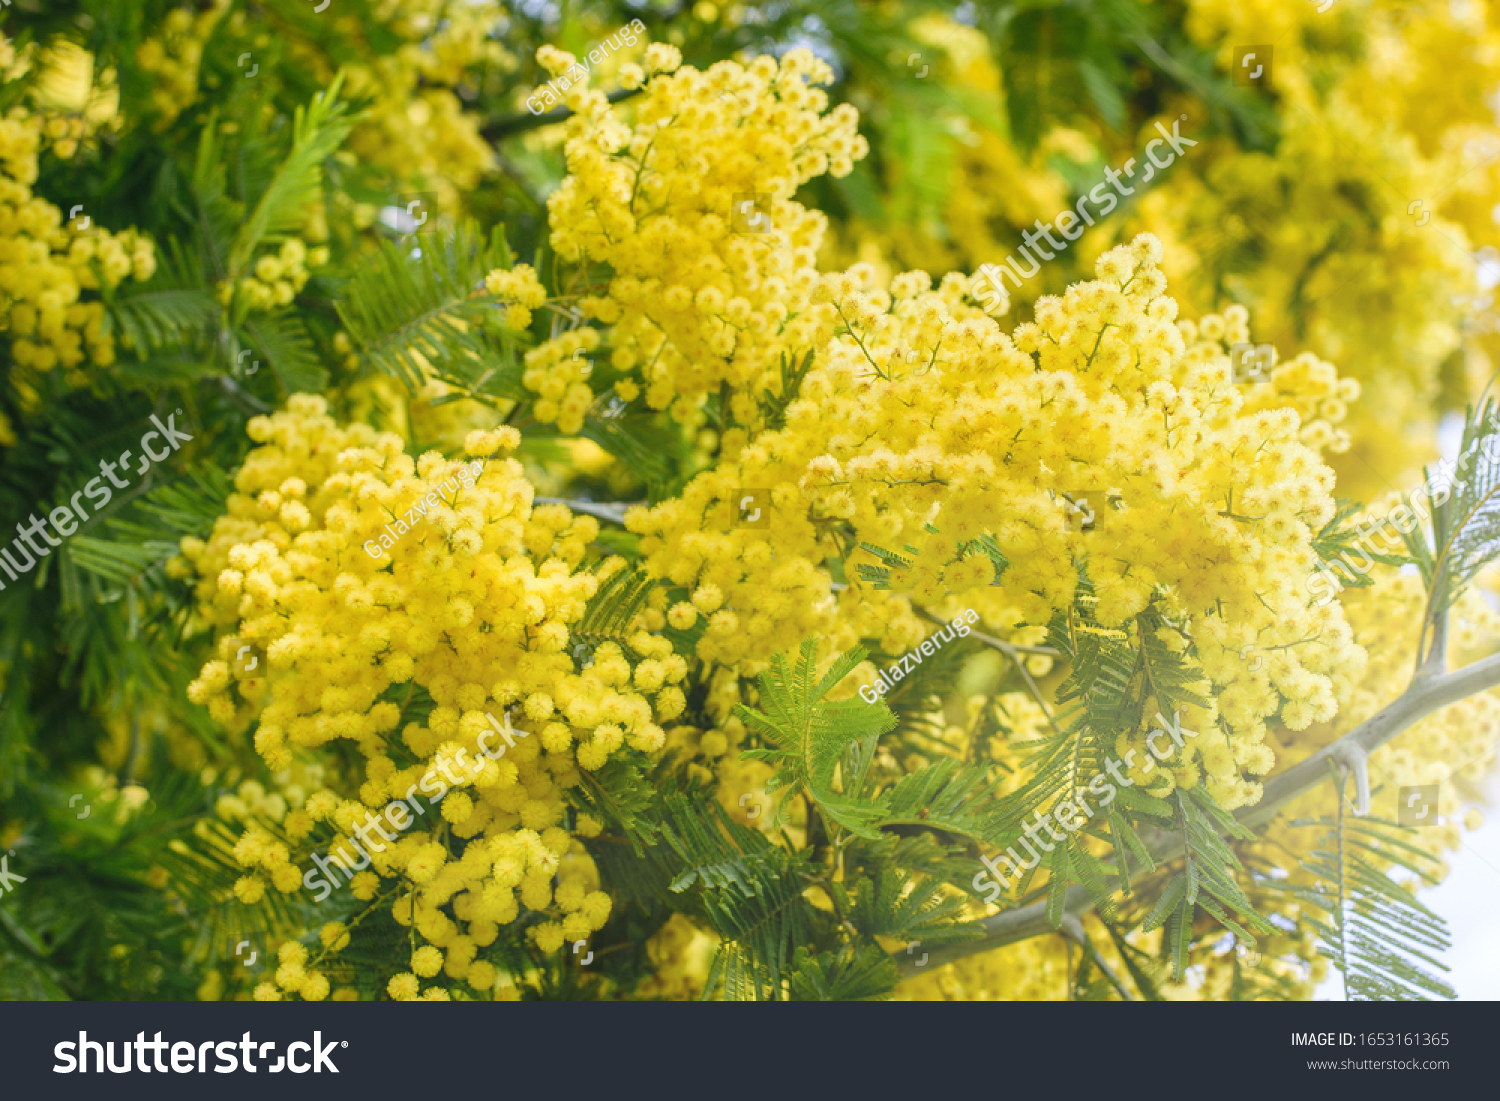 Mimosa tree with bunches of fluffy tender flowers of it. Background of yellow mimosa tree. Concept of holidays and mimosa flower decoration.  #1653161365